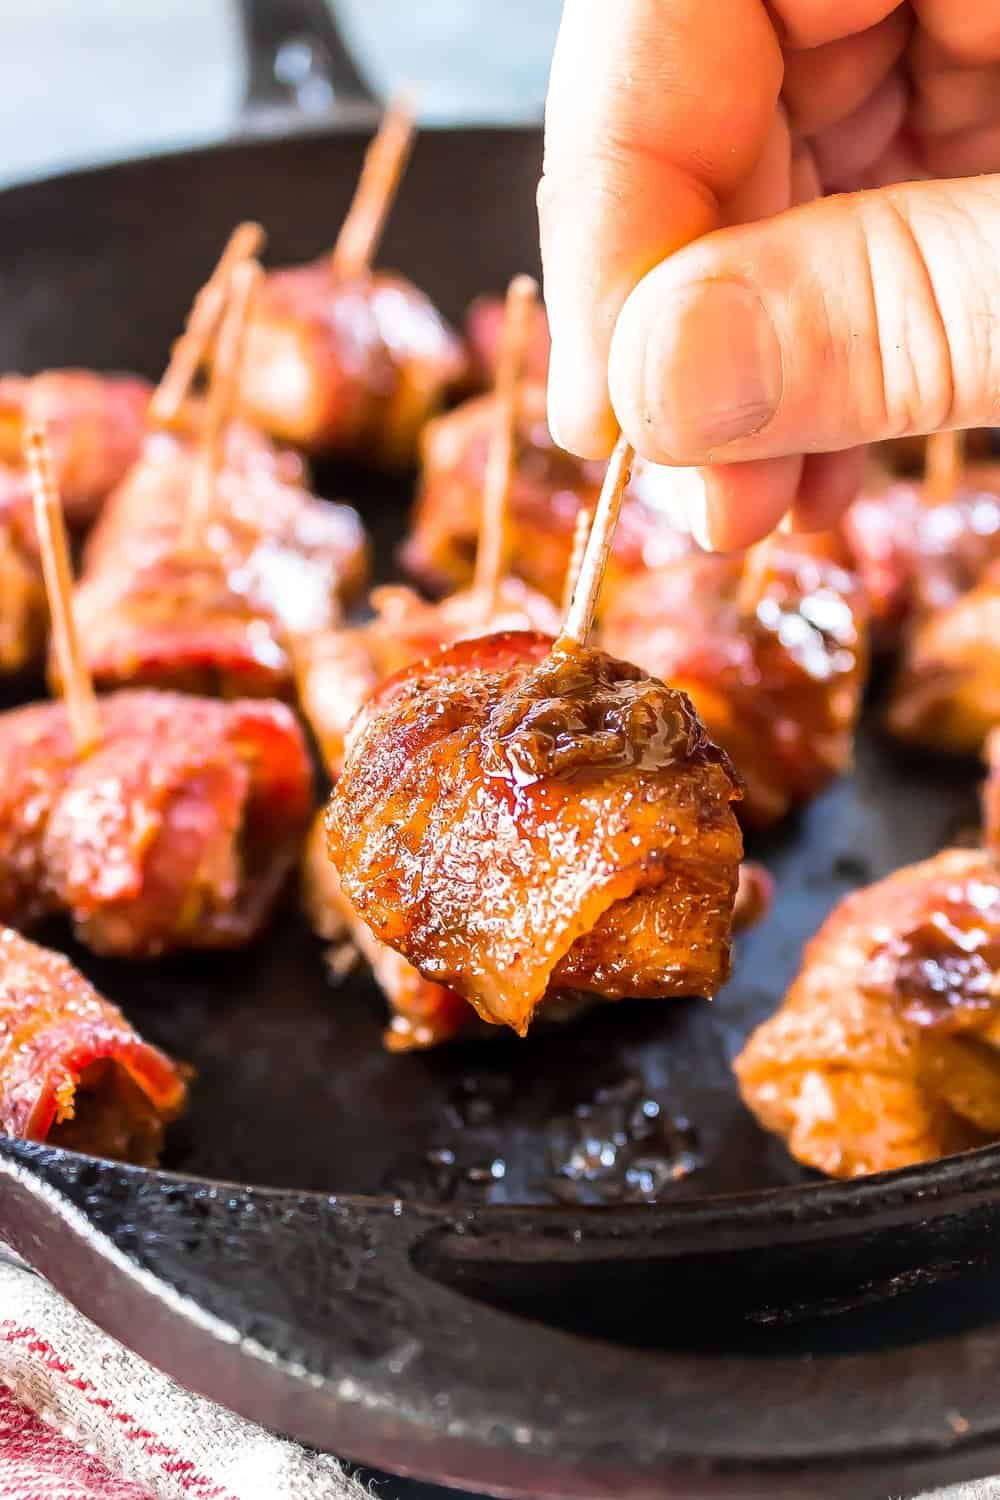 Keto Bacon Brown Sugar Chicken Bites with one being picked up with a toothpick